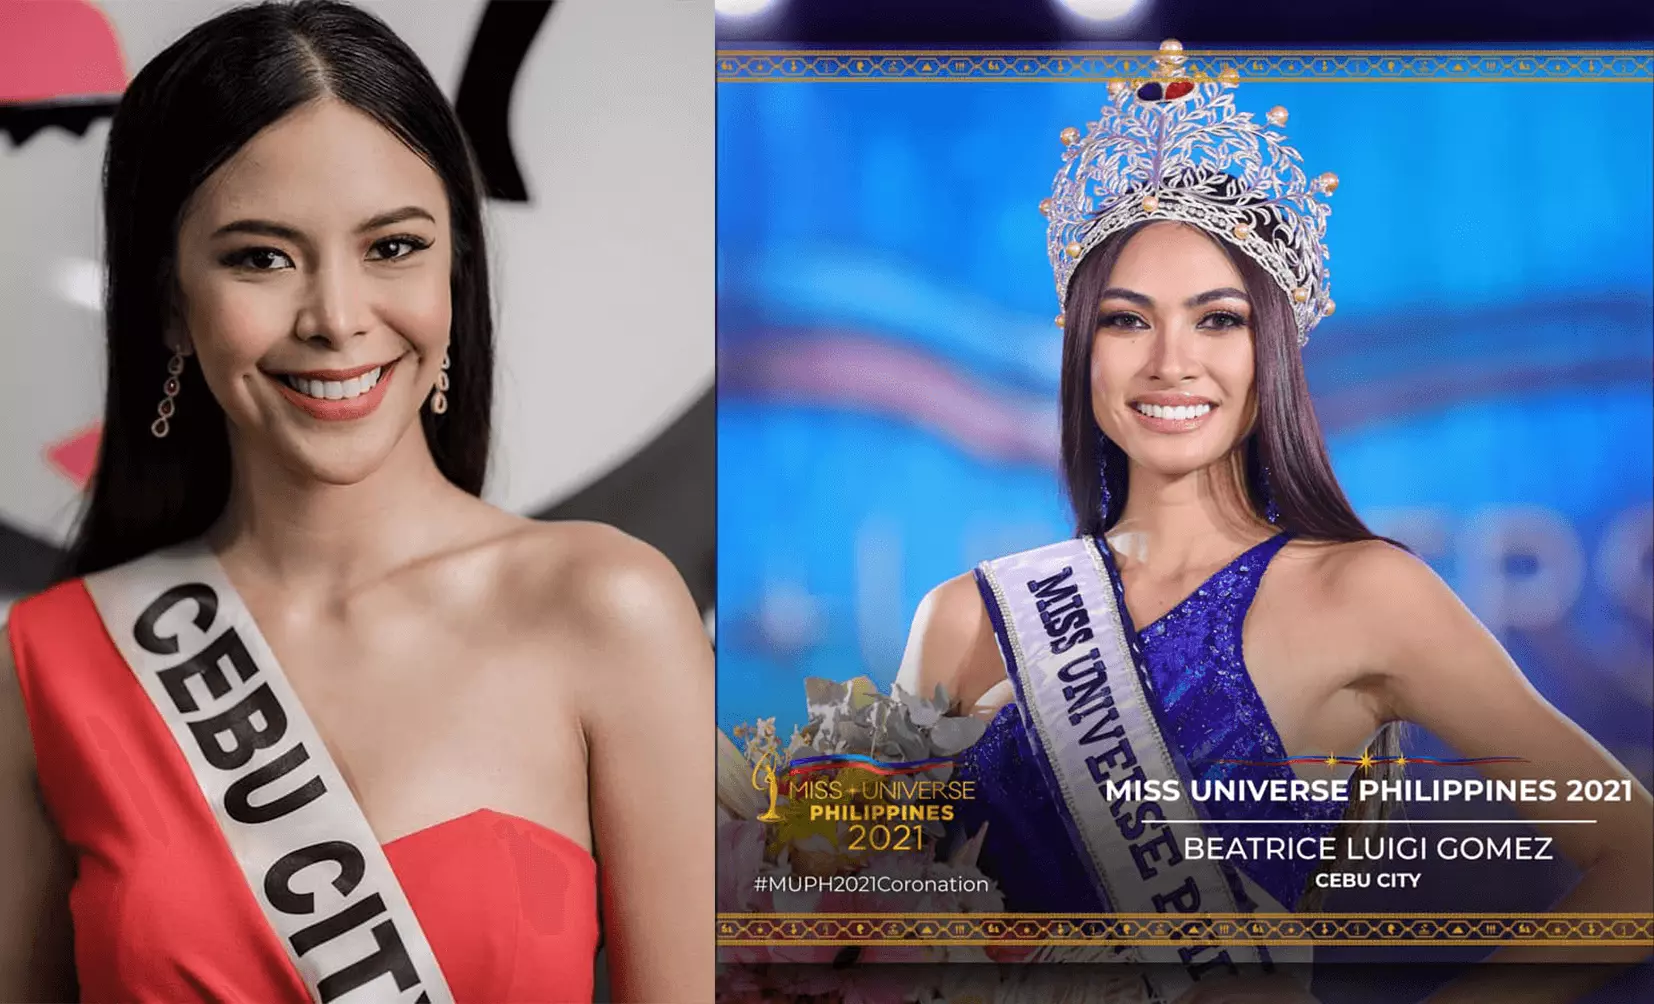 Beauty Queen Central Of The Philippines Cebu Wins Miss Universe Philippines And Miss World